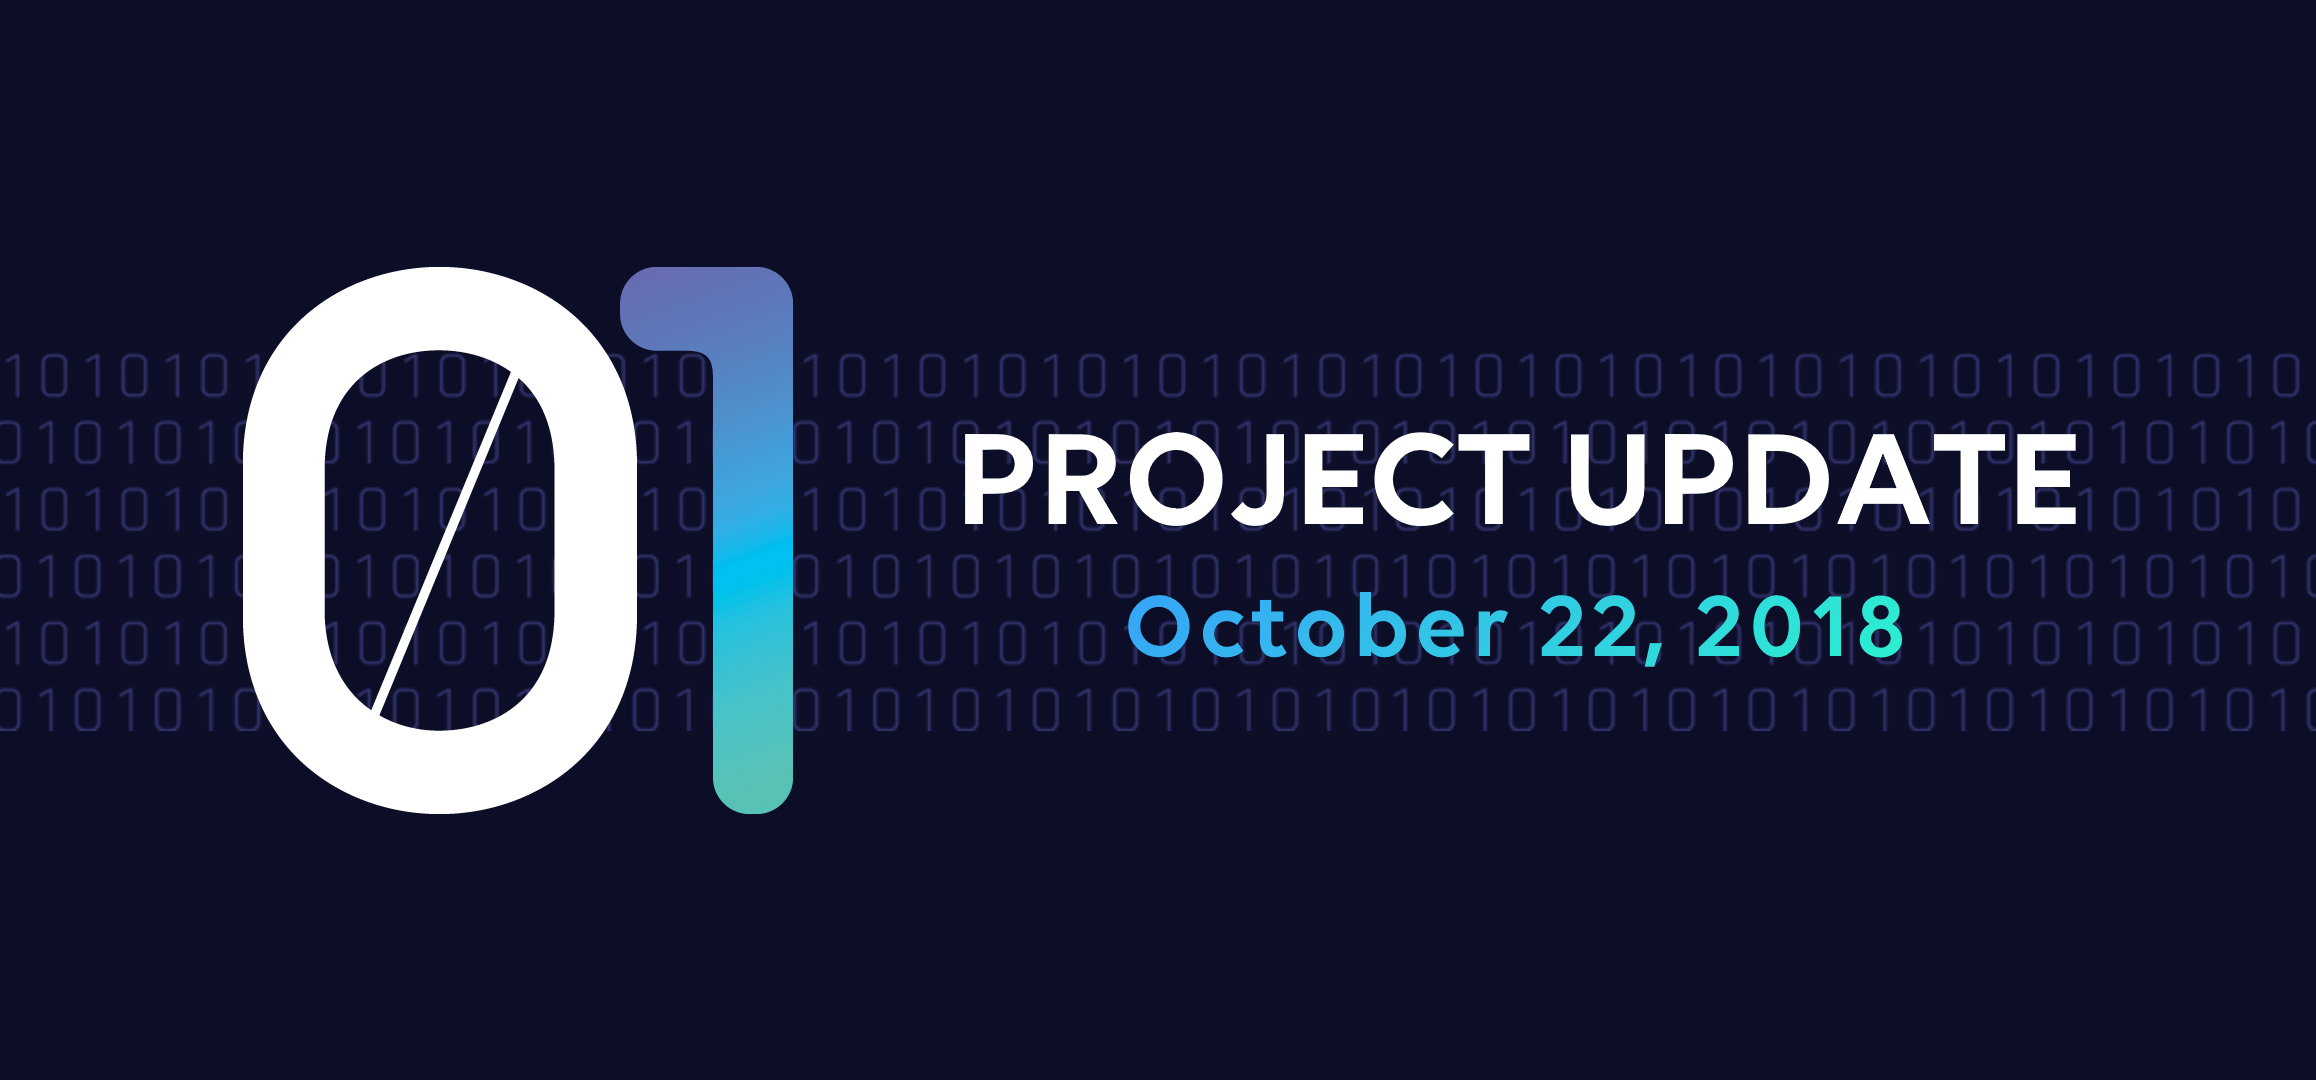 ProjectUpdate-181022.png